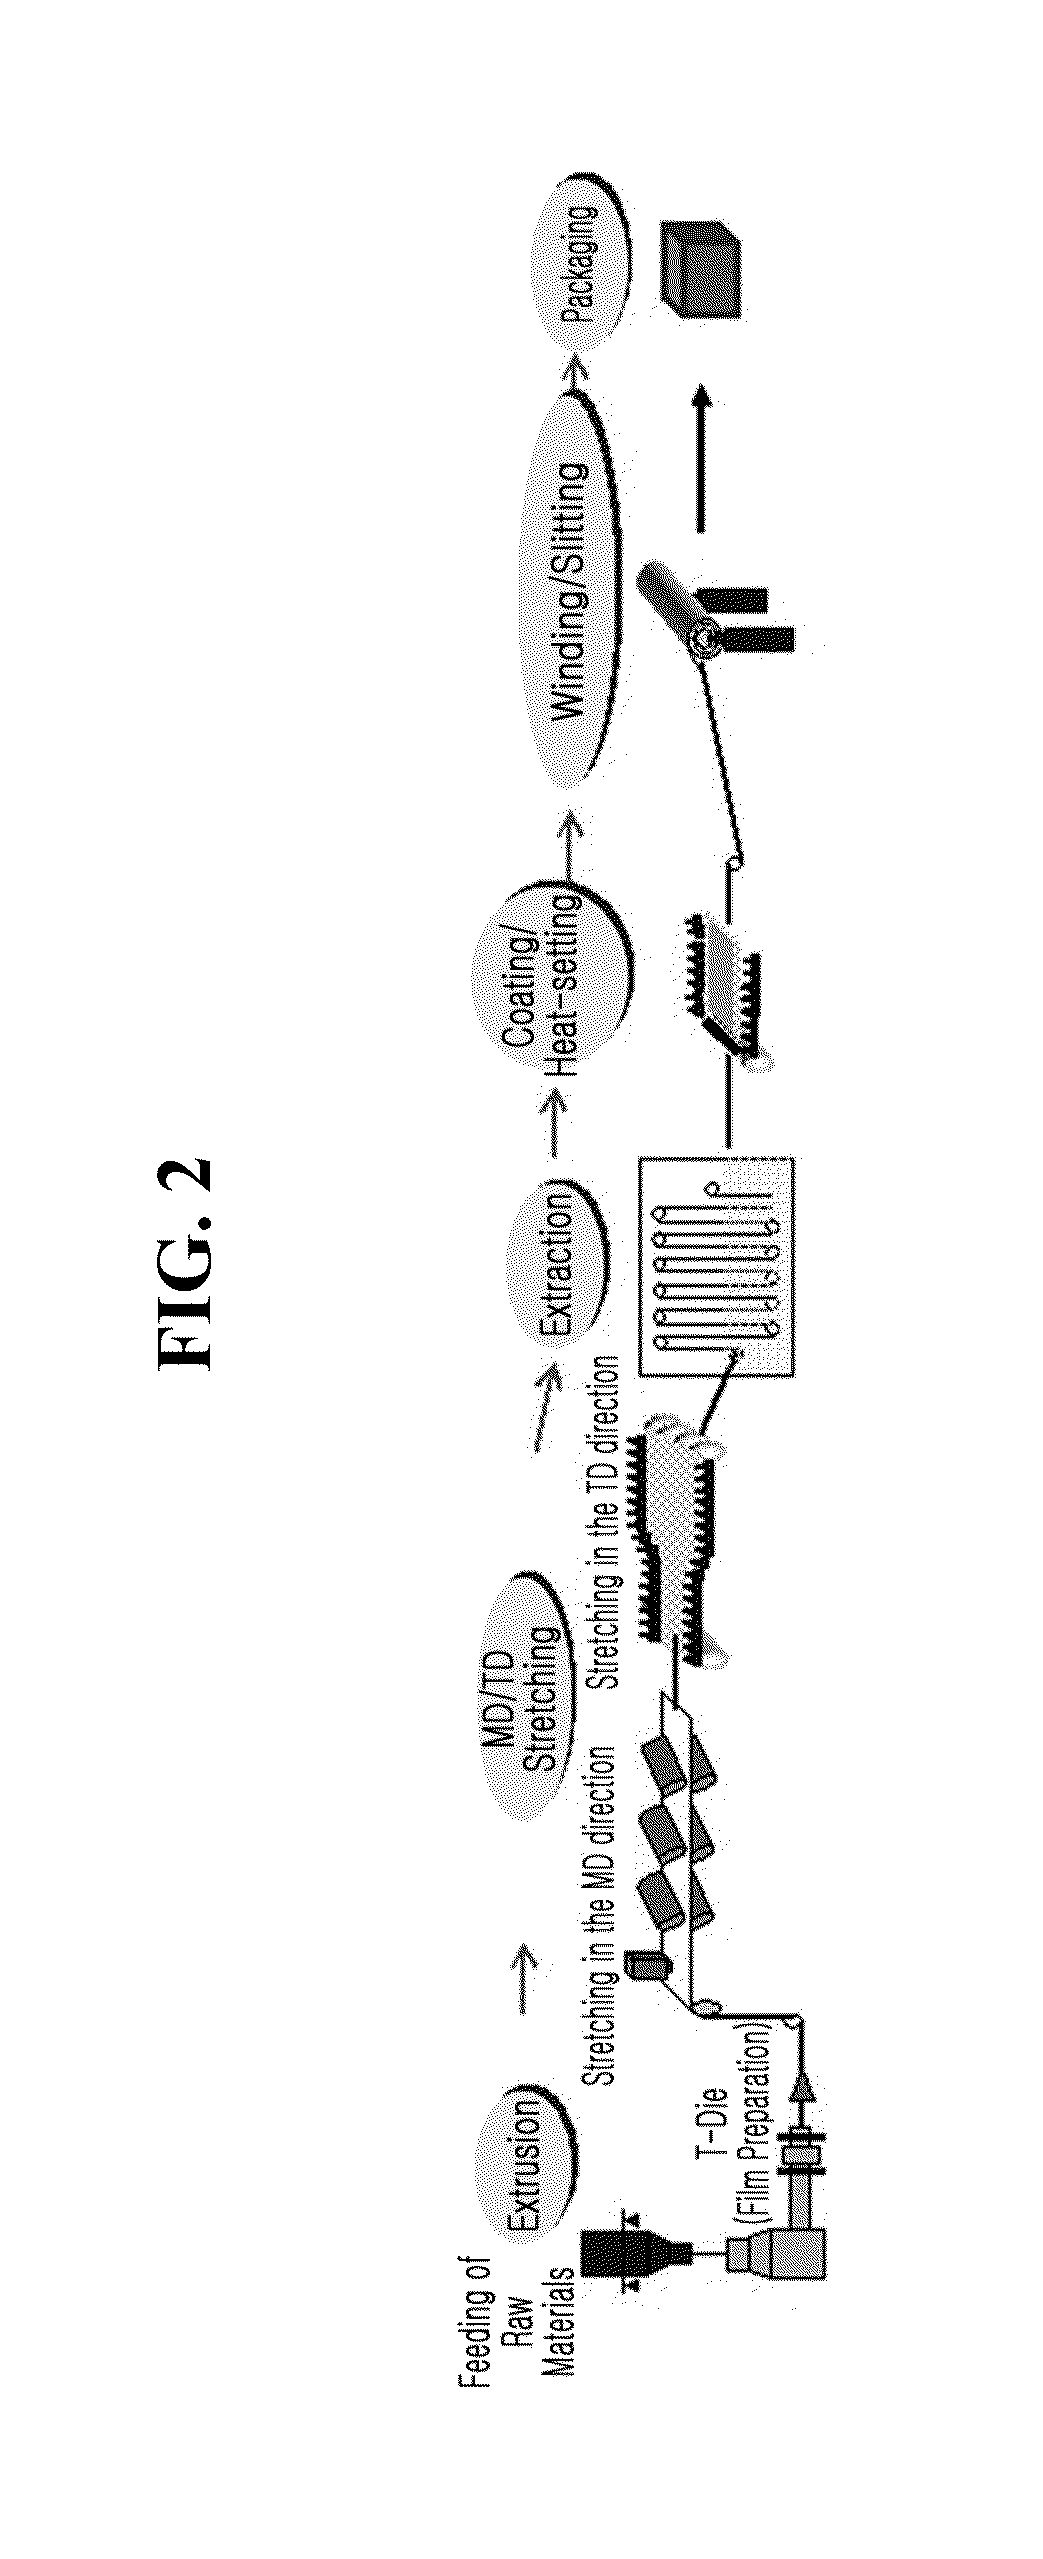 Separator for electrochemical device